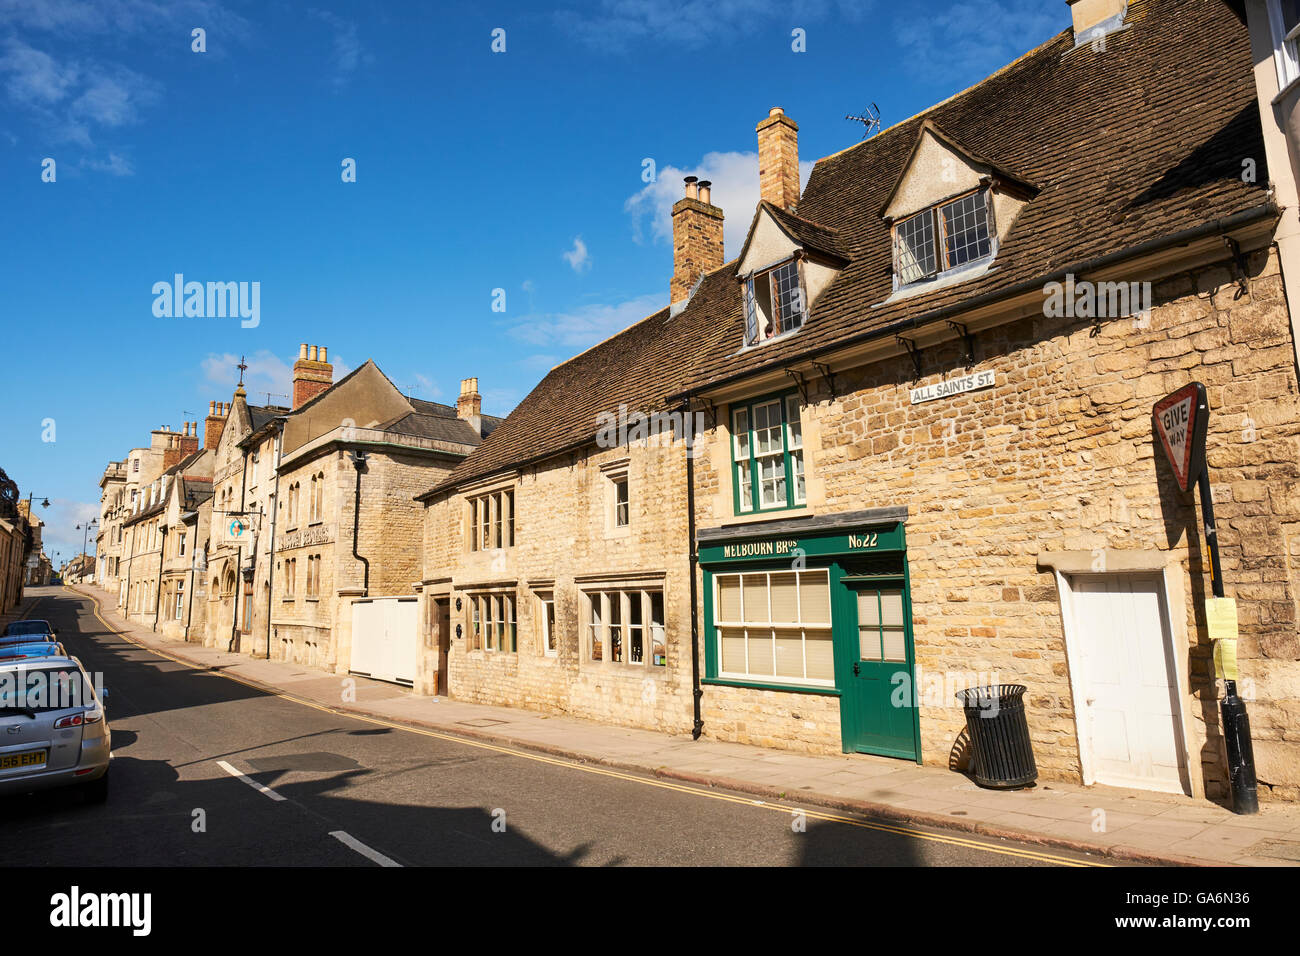 Melbourn Brothers And All Saints Brewery All Saints Street Stamford Lincolnshire UK Stock Photo